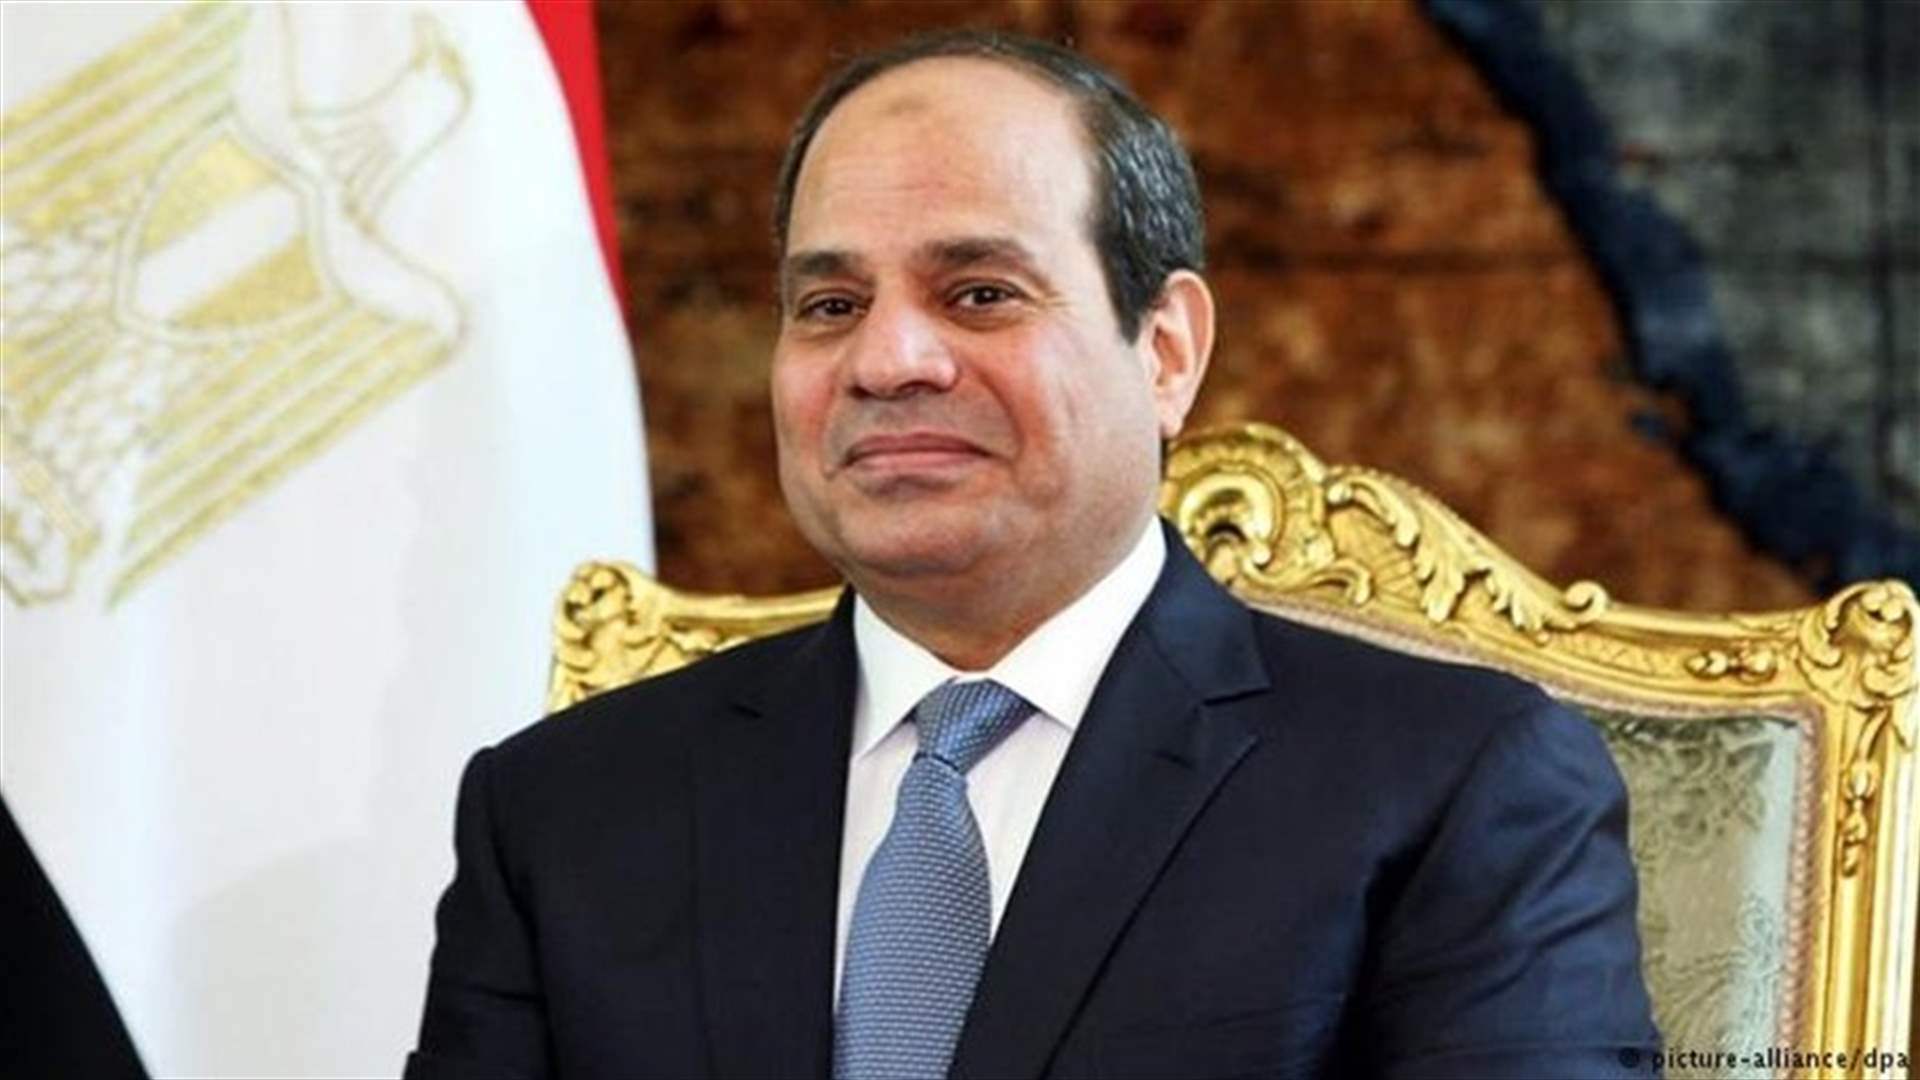 Egyptian President confirms transfer of money from UAE agreement to Central Bank